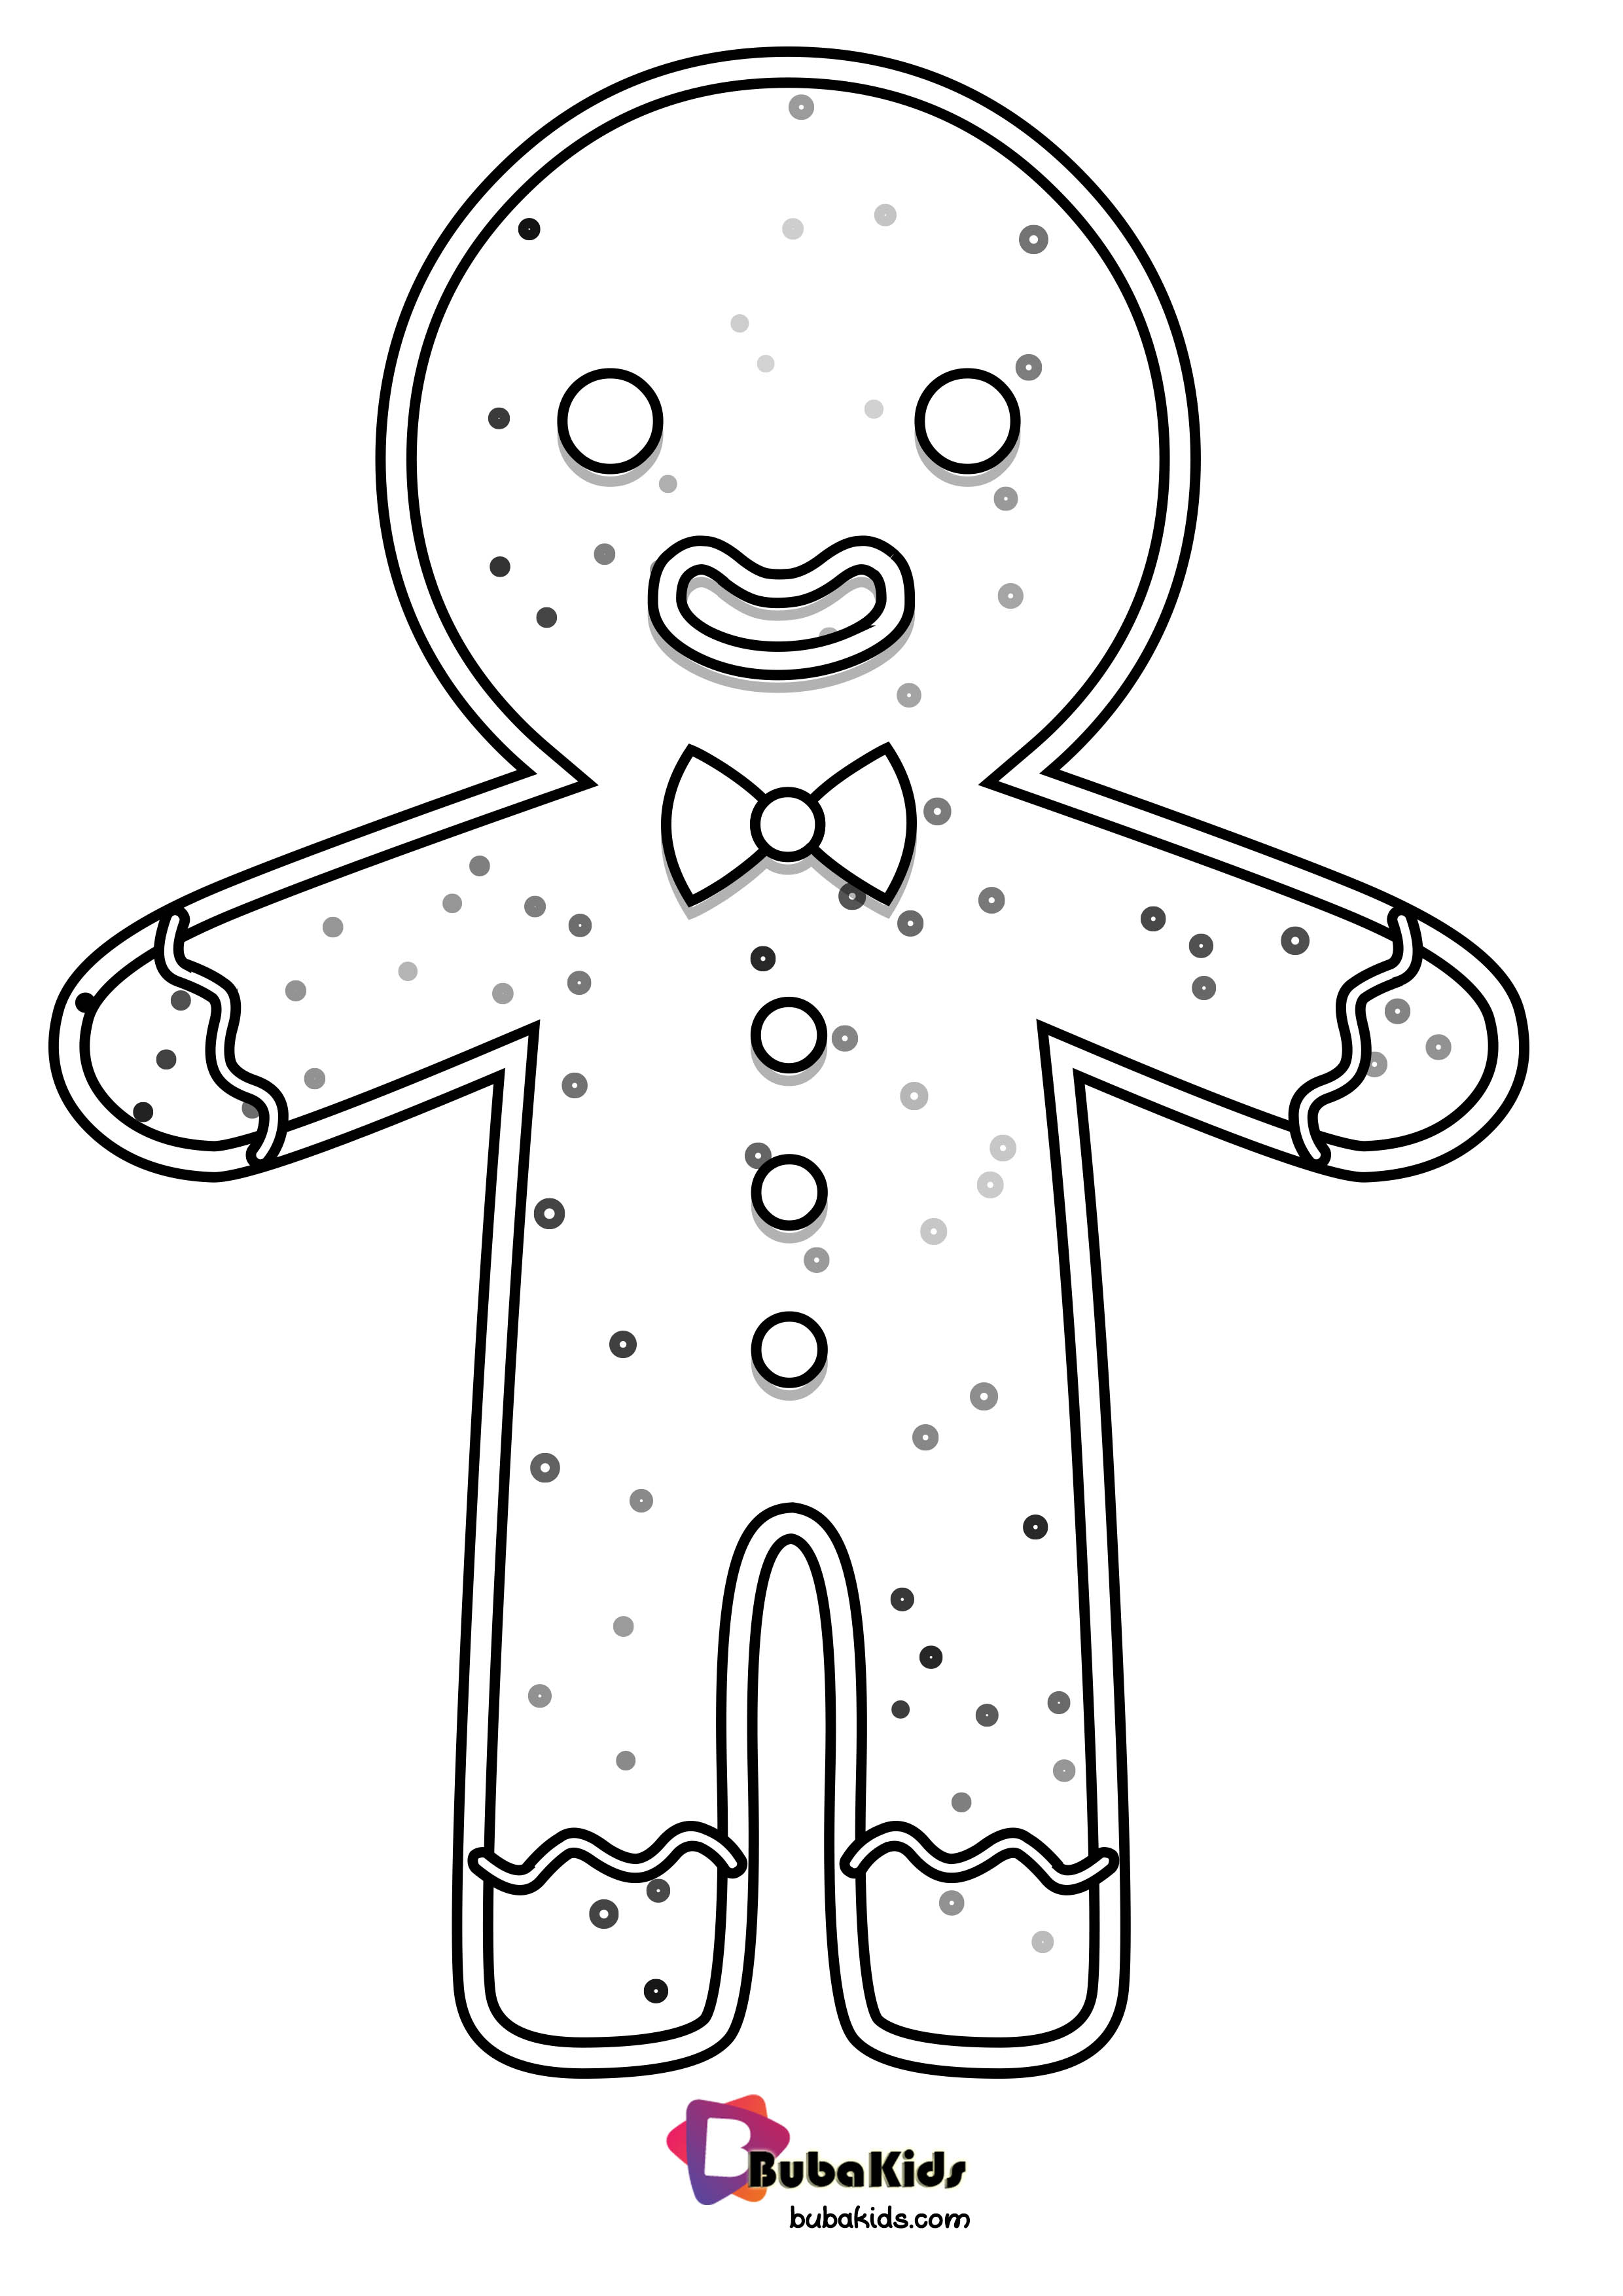 gingerbread-man-coloring-page-bubakids